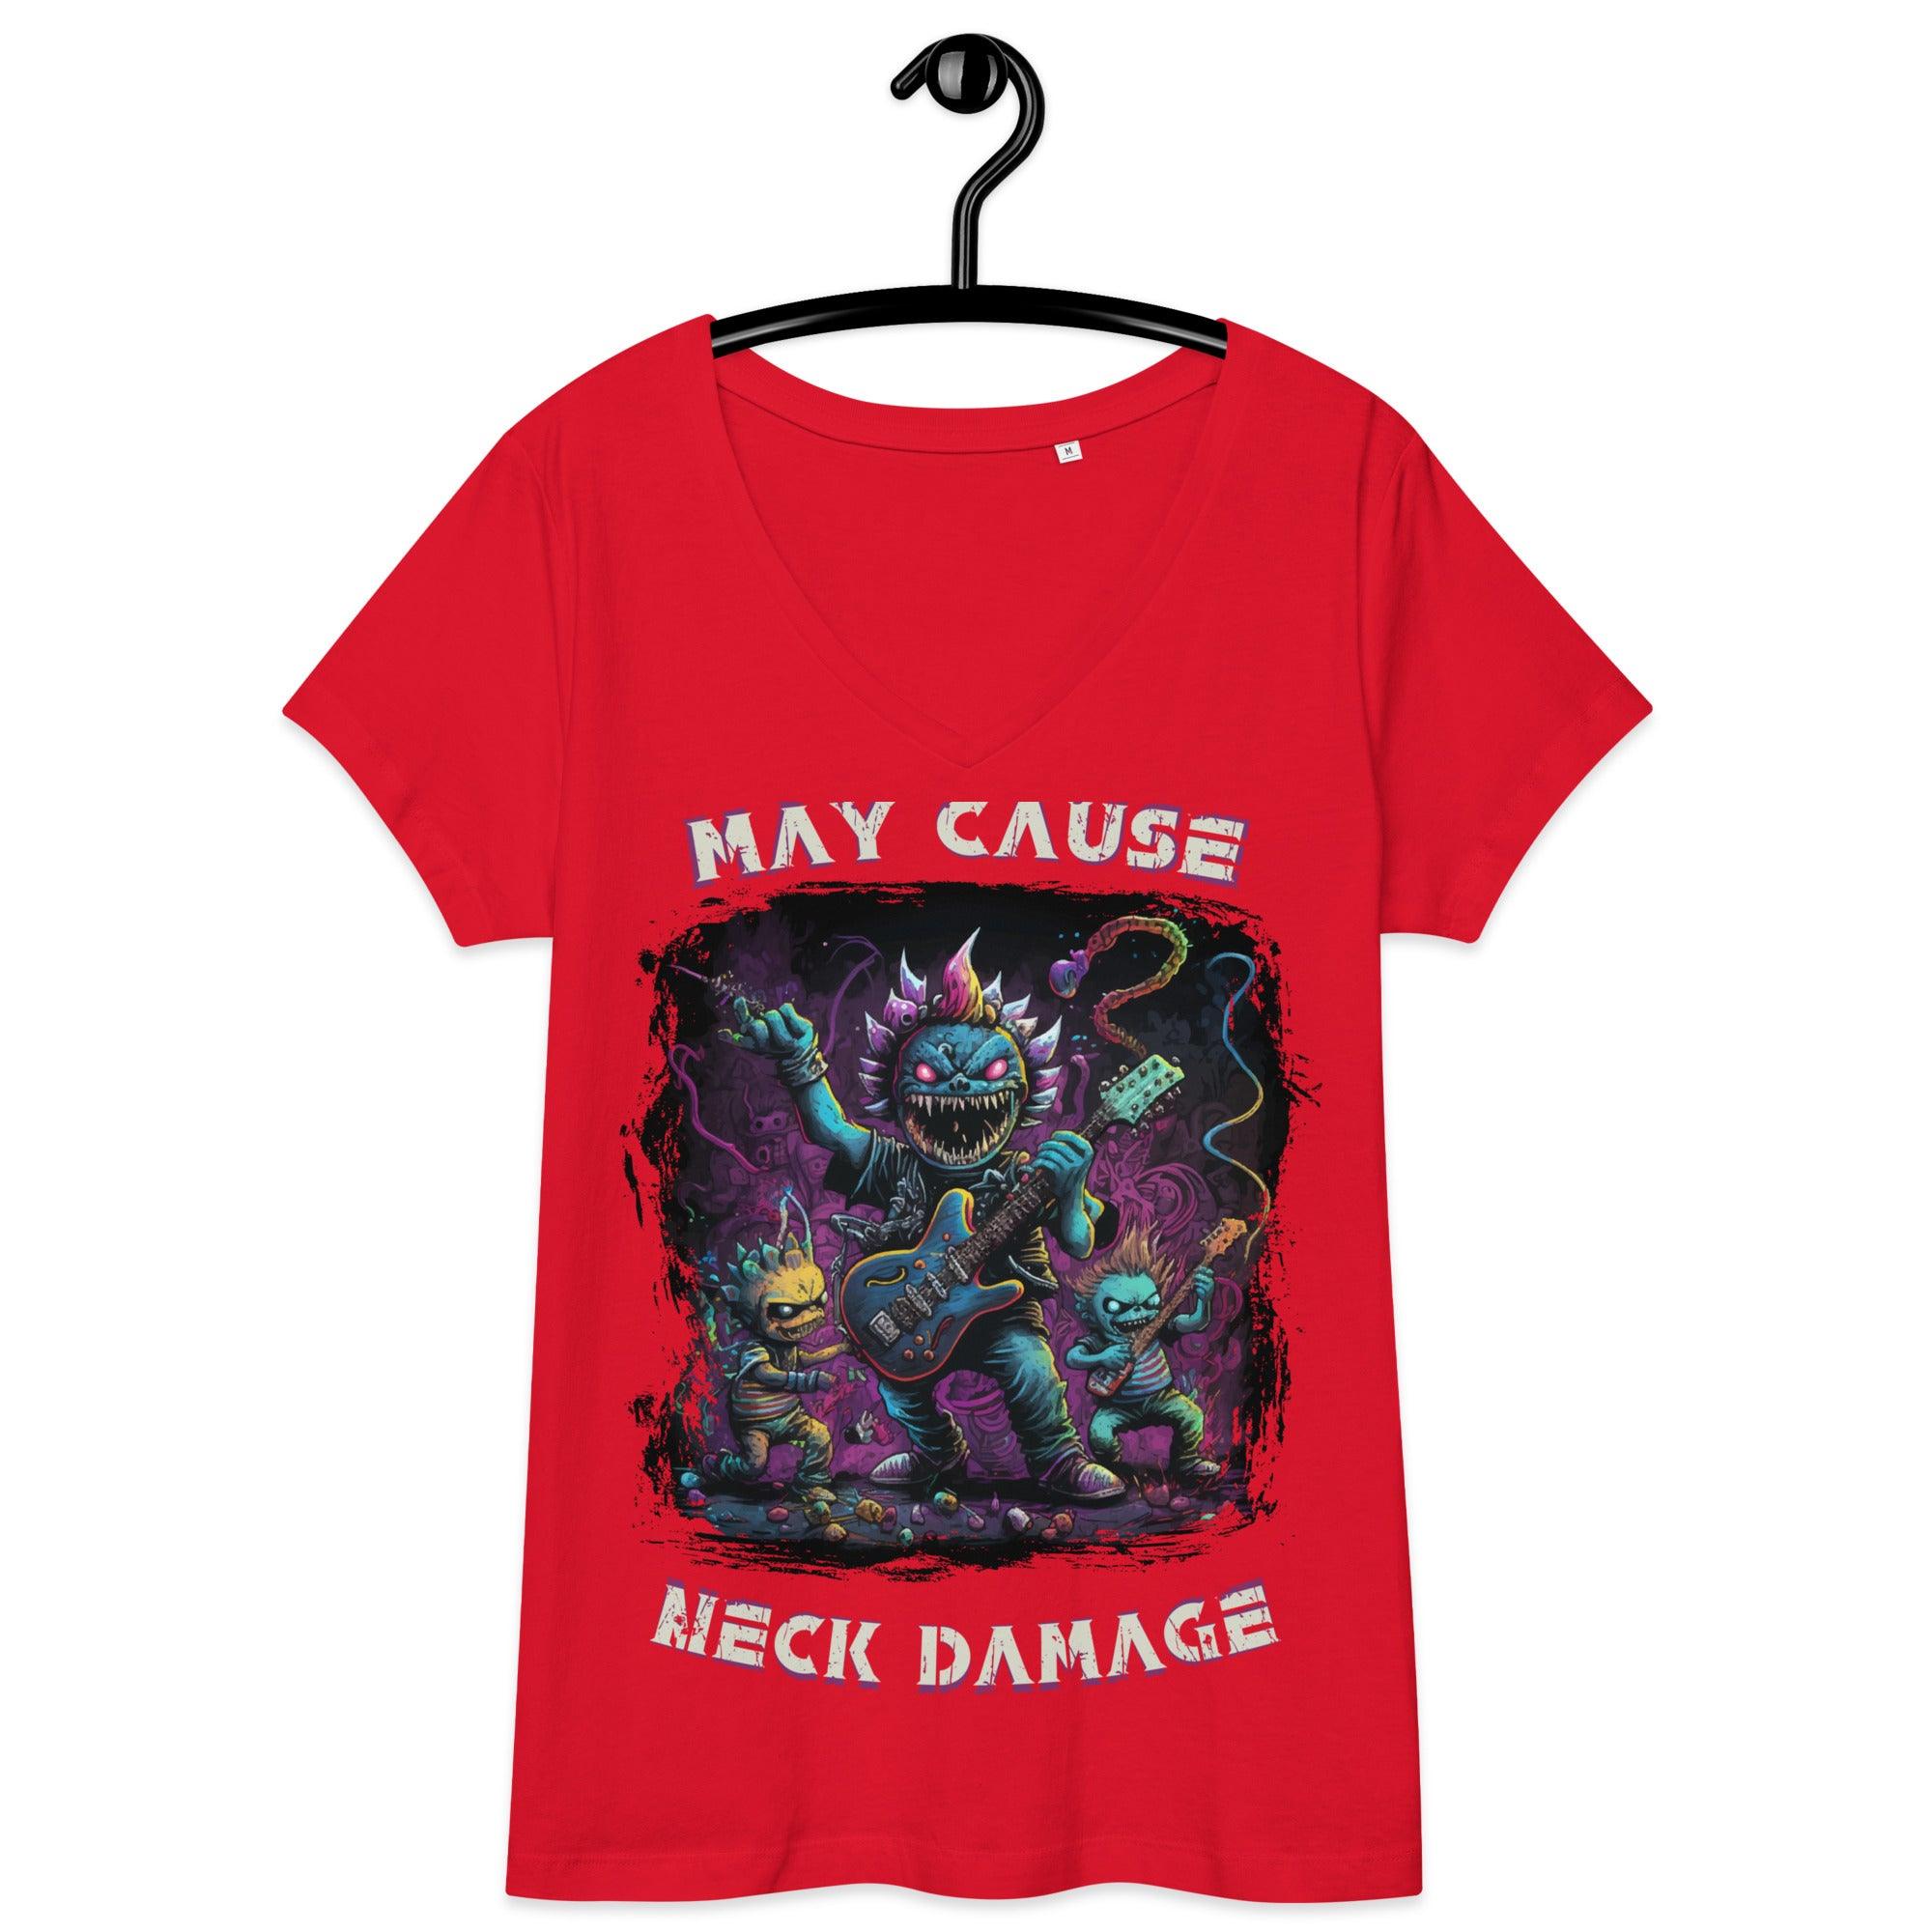 May cause neck damage women’s fitted v-neck t-shirt - Beyond T-shirts